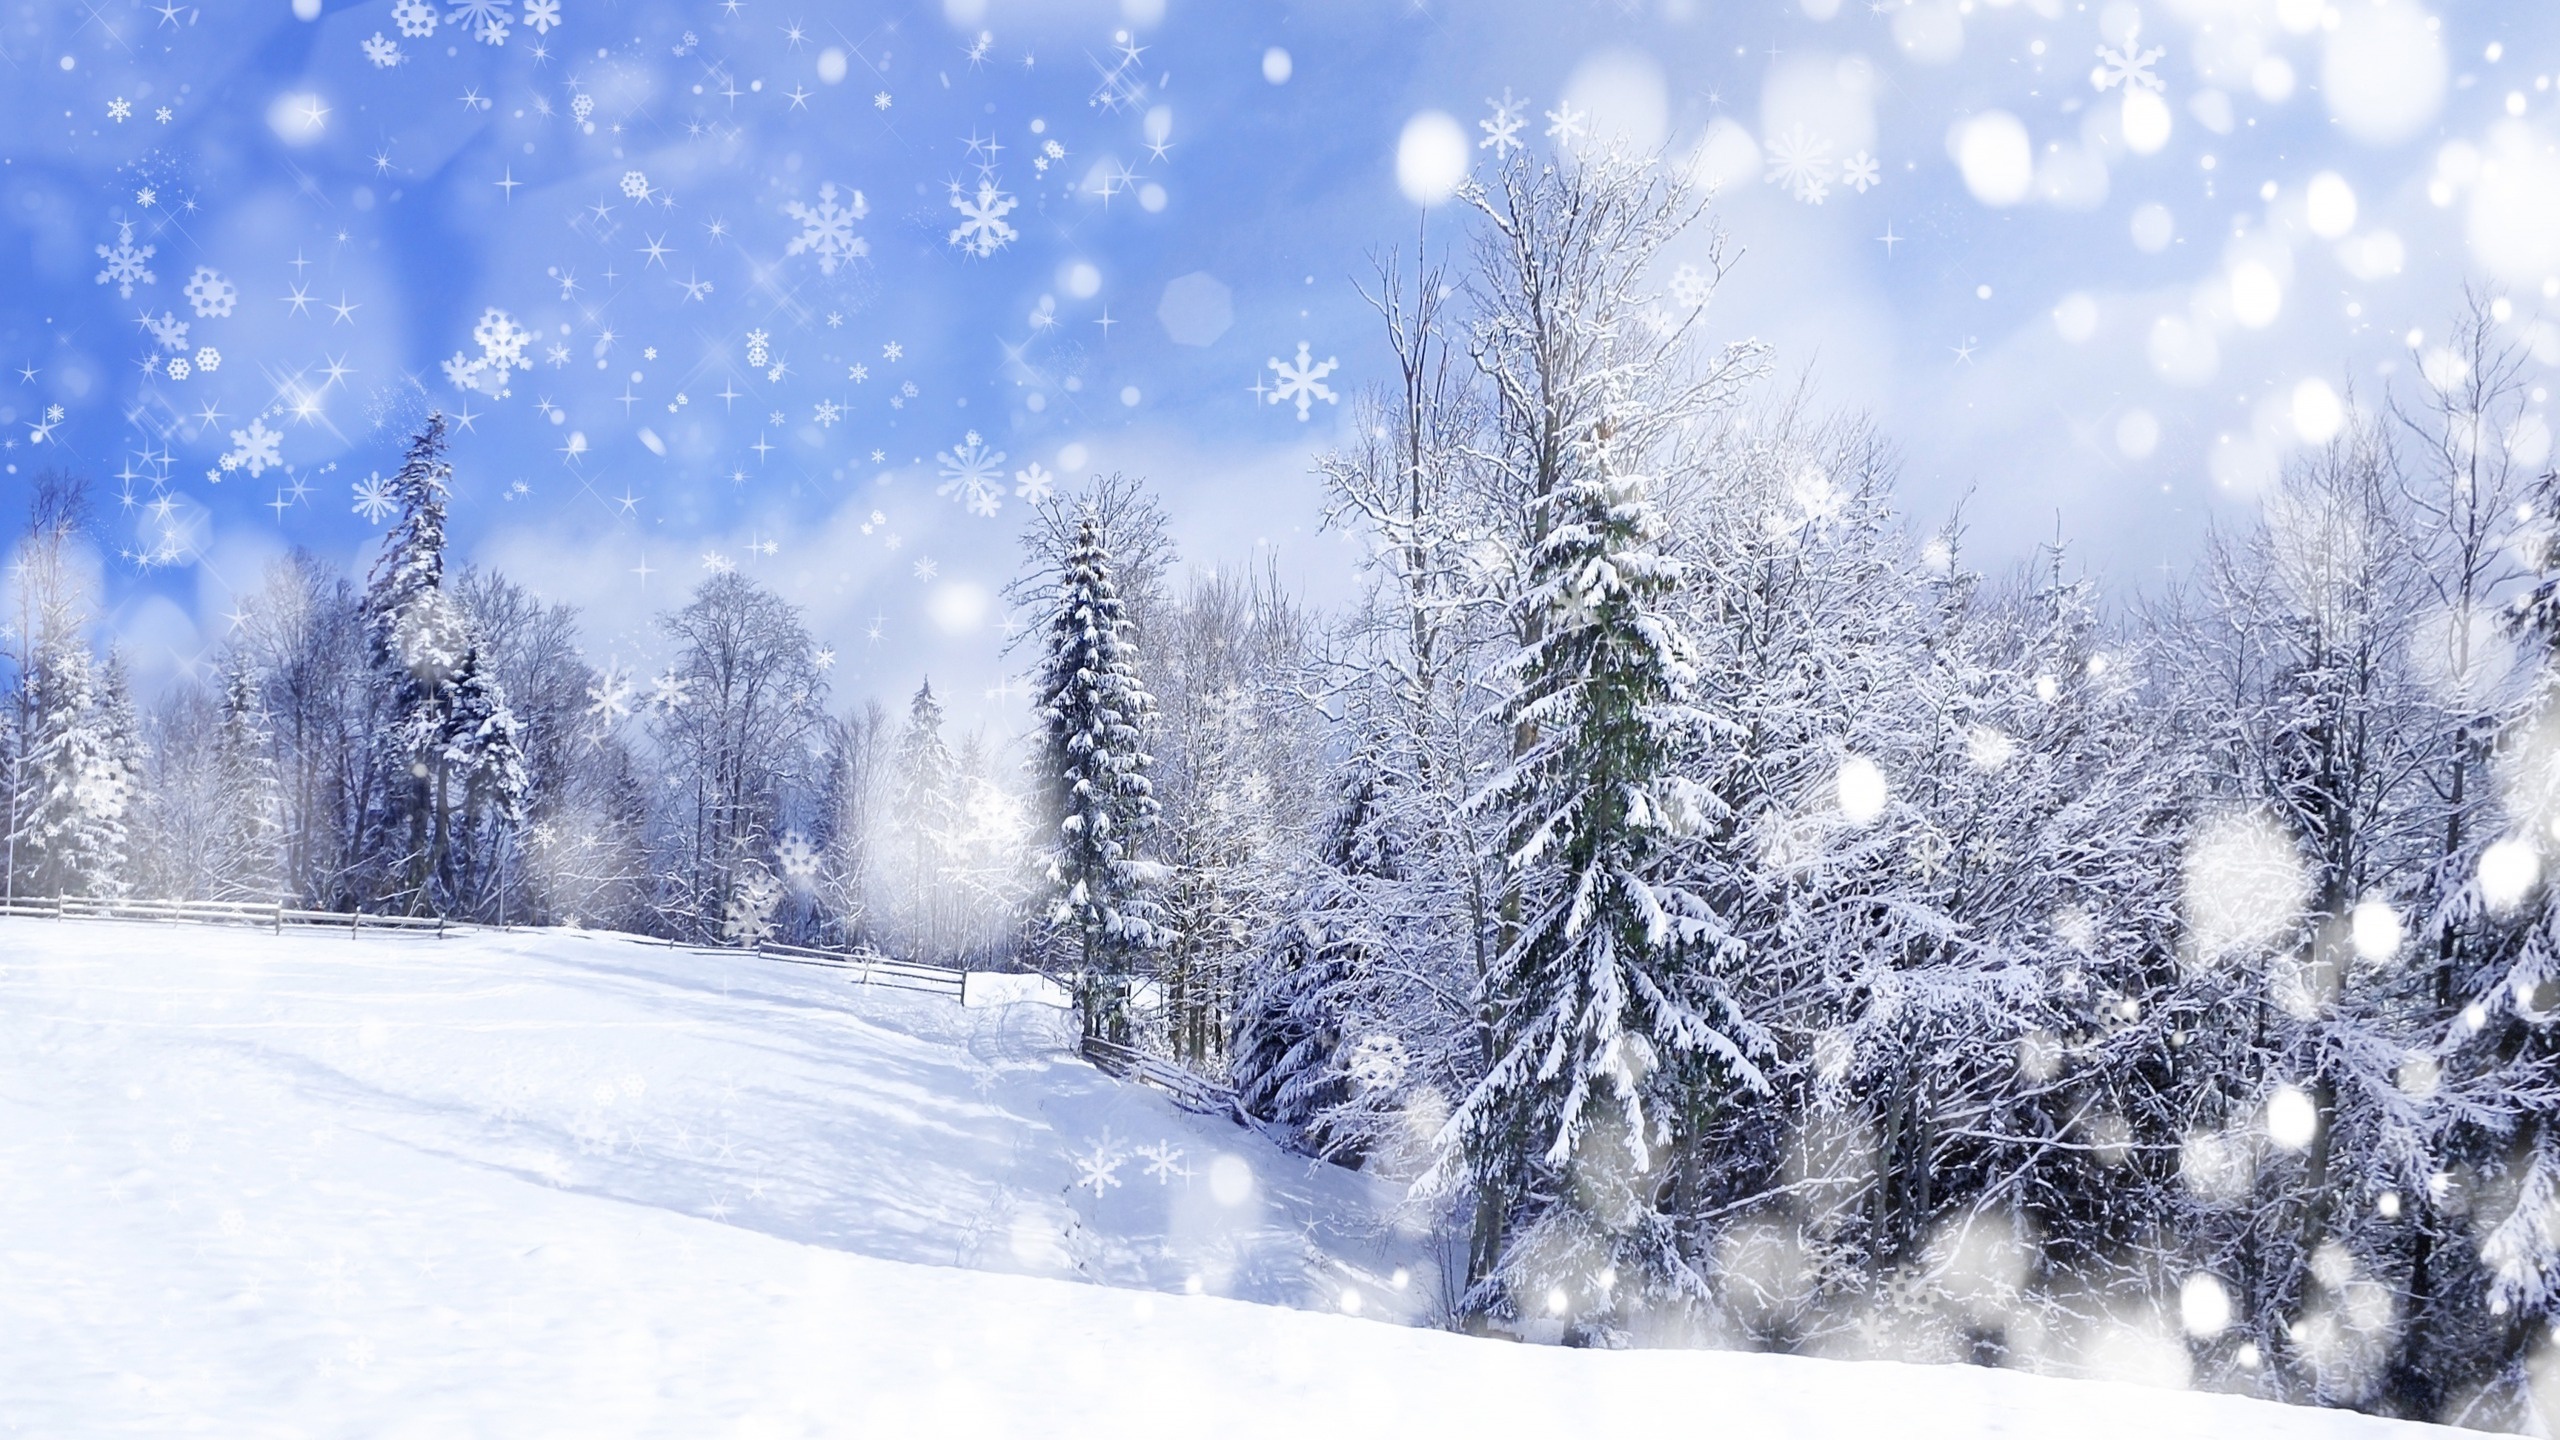 HD desktop wallpaper: Winter, Snow, Forest, Tree, Artistic, Snowflake  download free picture #783323